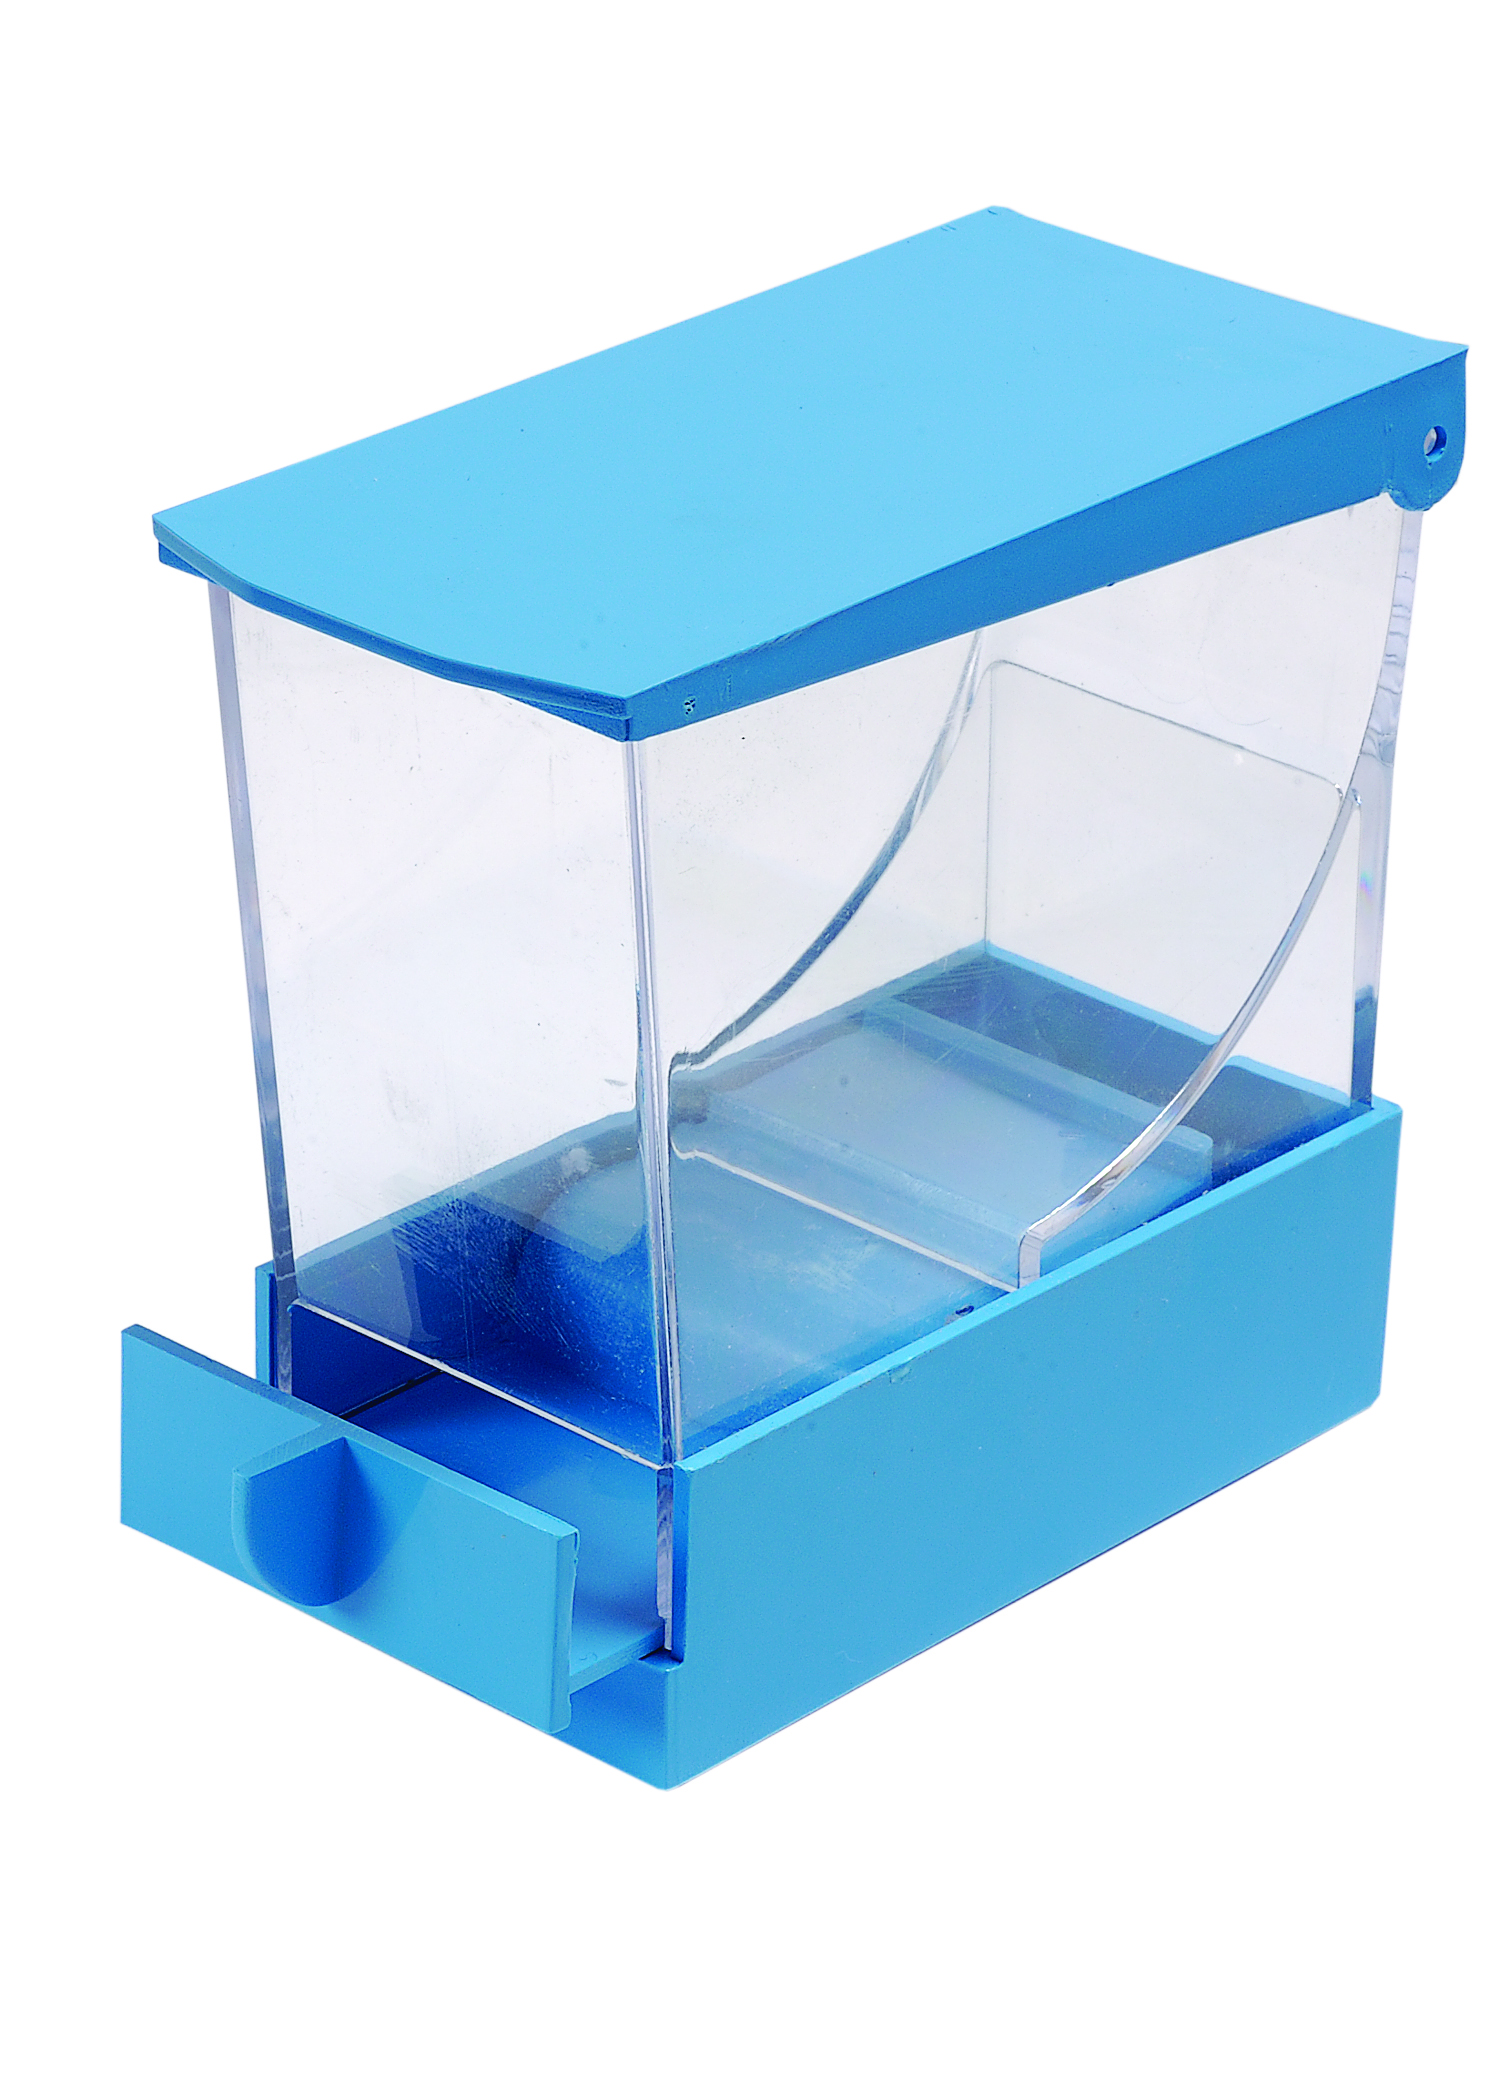 Picture of Cotton Roll Dispenser  -  BLUE